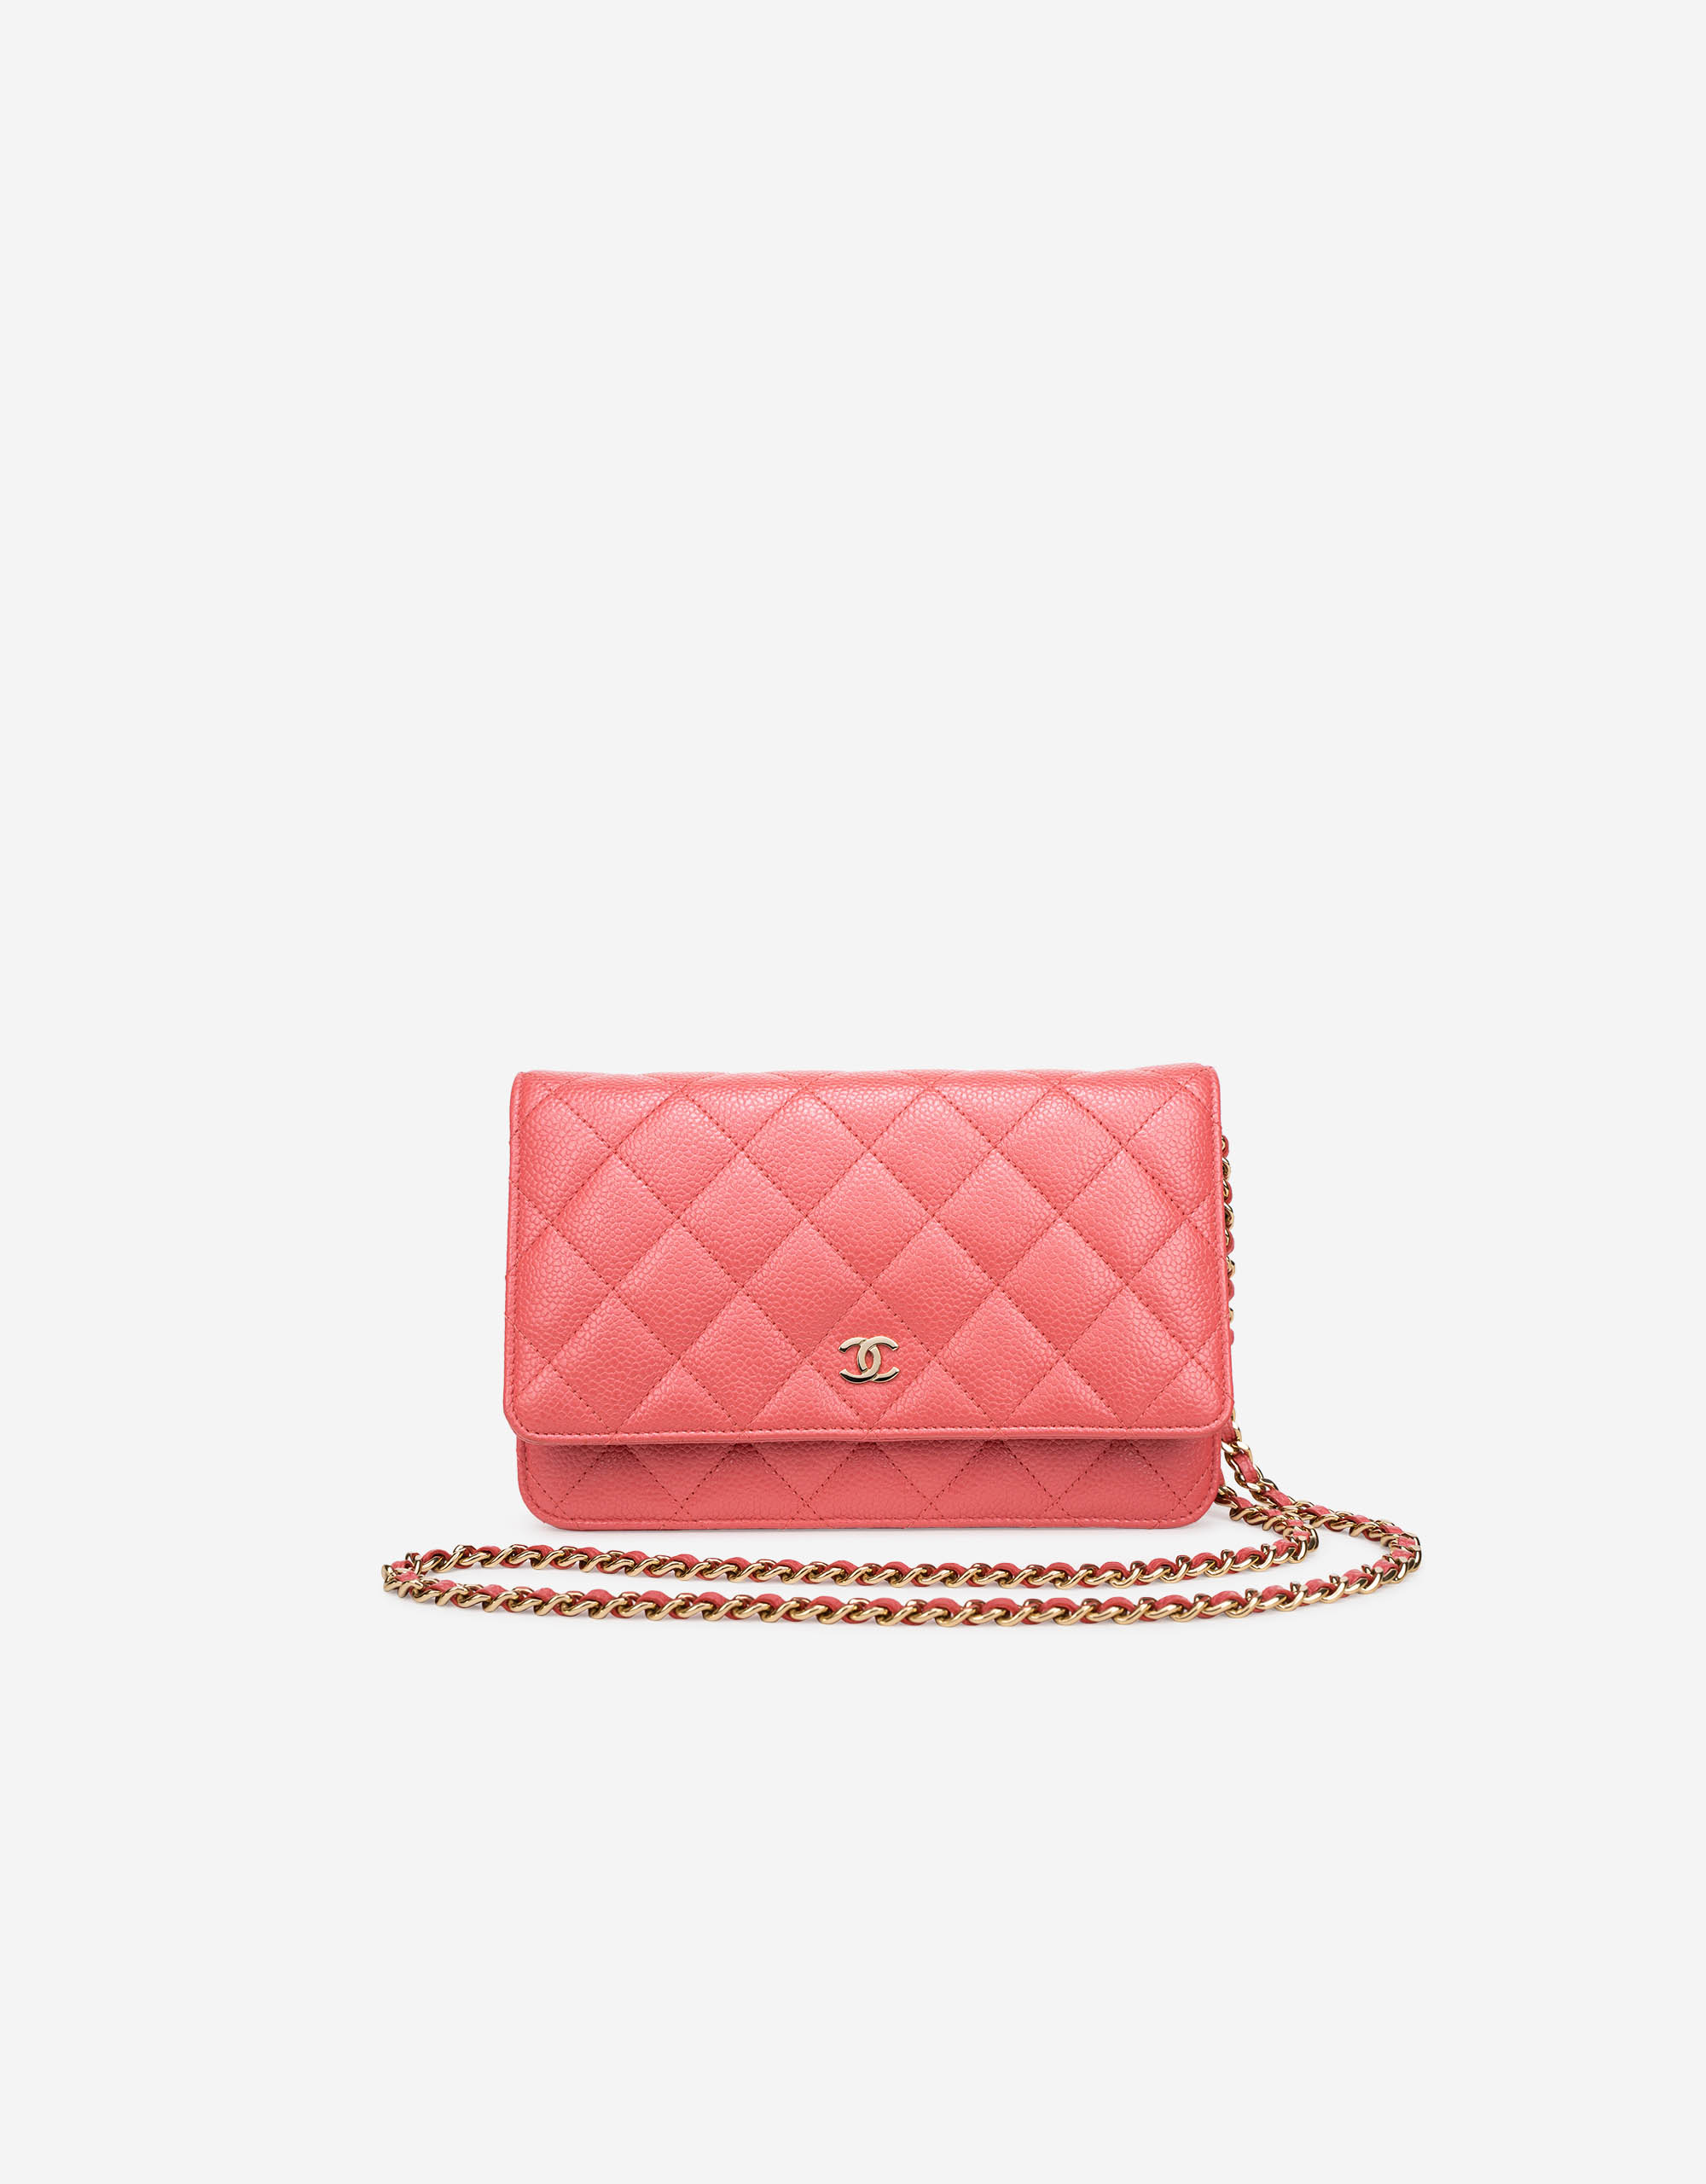 Chanel Melody Flap, Bright Pink Caviar with Gold Hardware, Preowned in Box  WA001 - Julia Rose Boston